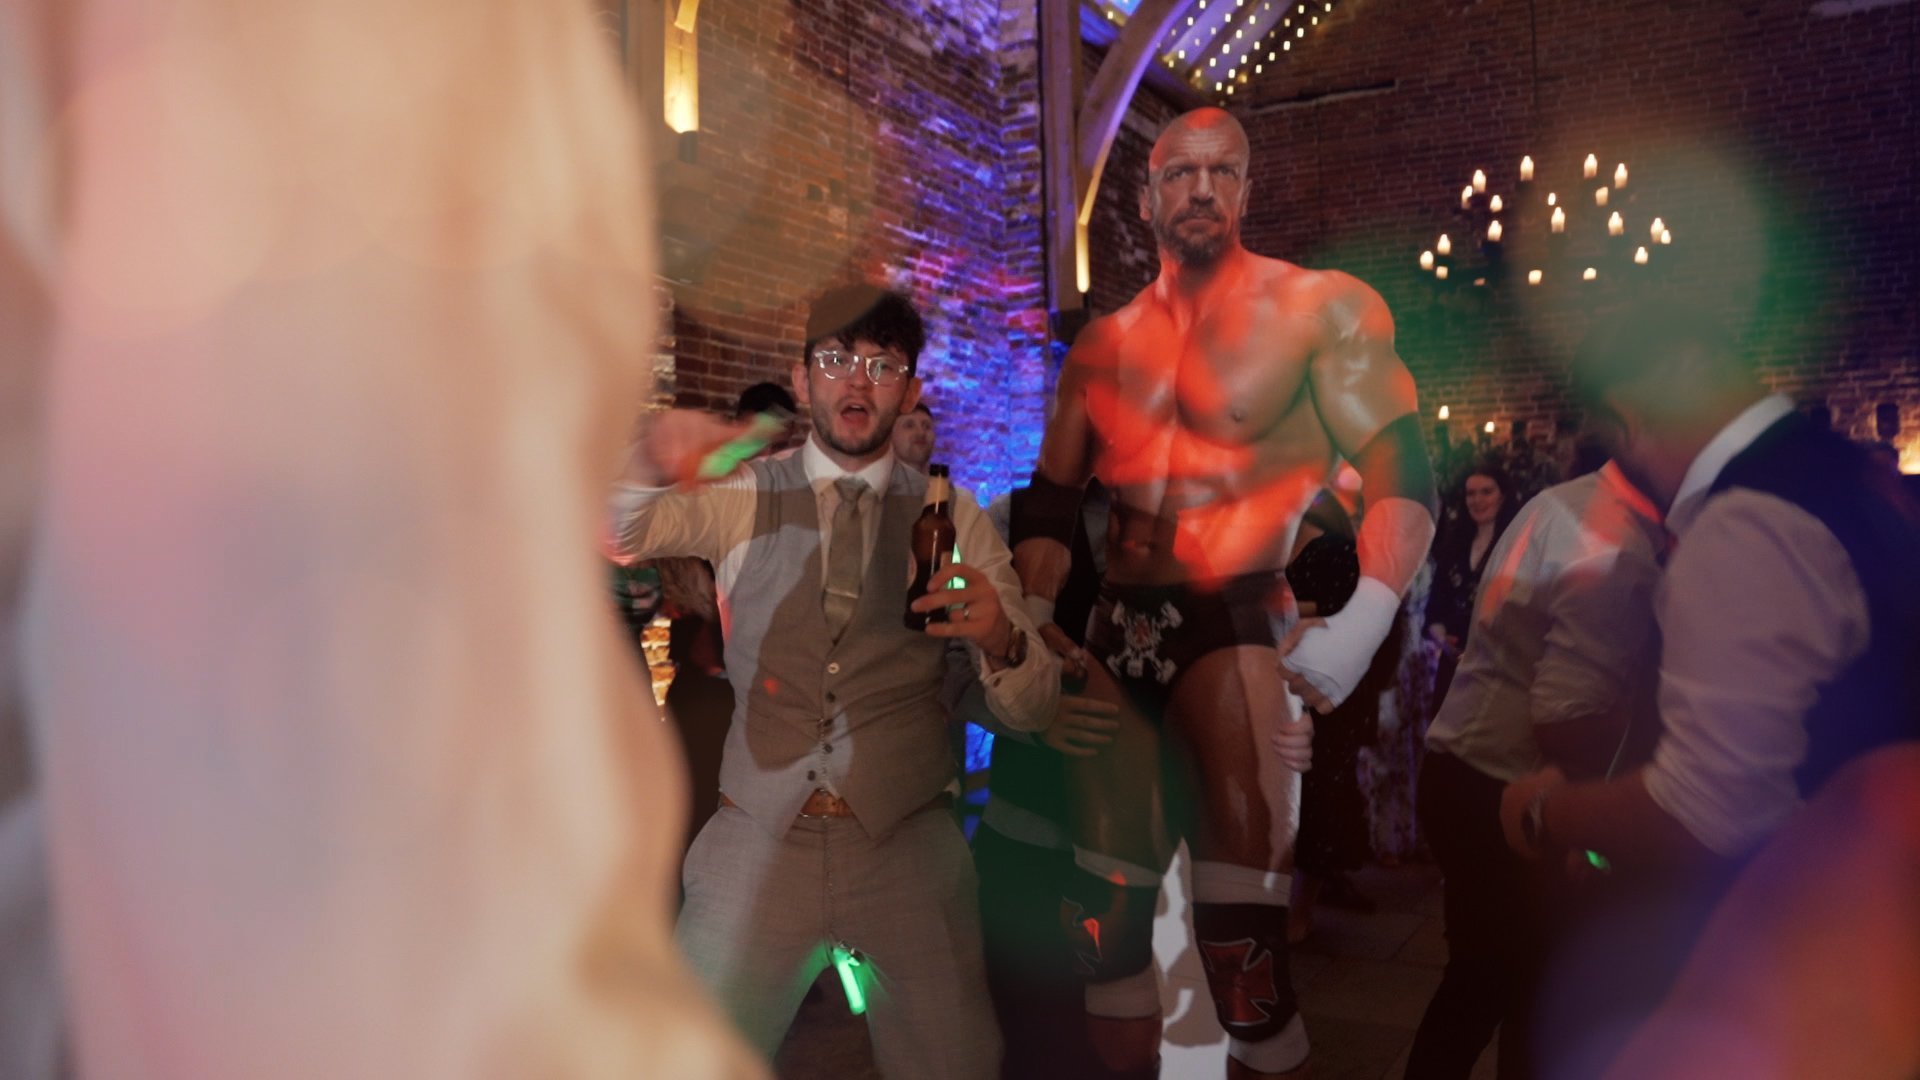 A newly-married groom dancing at his WWE themed wedding reception in front of a life-sized cut out of a wrestler